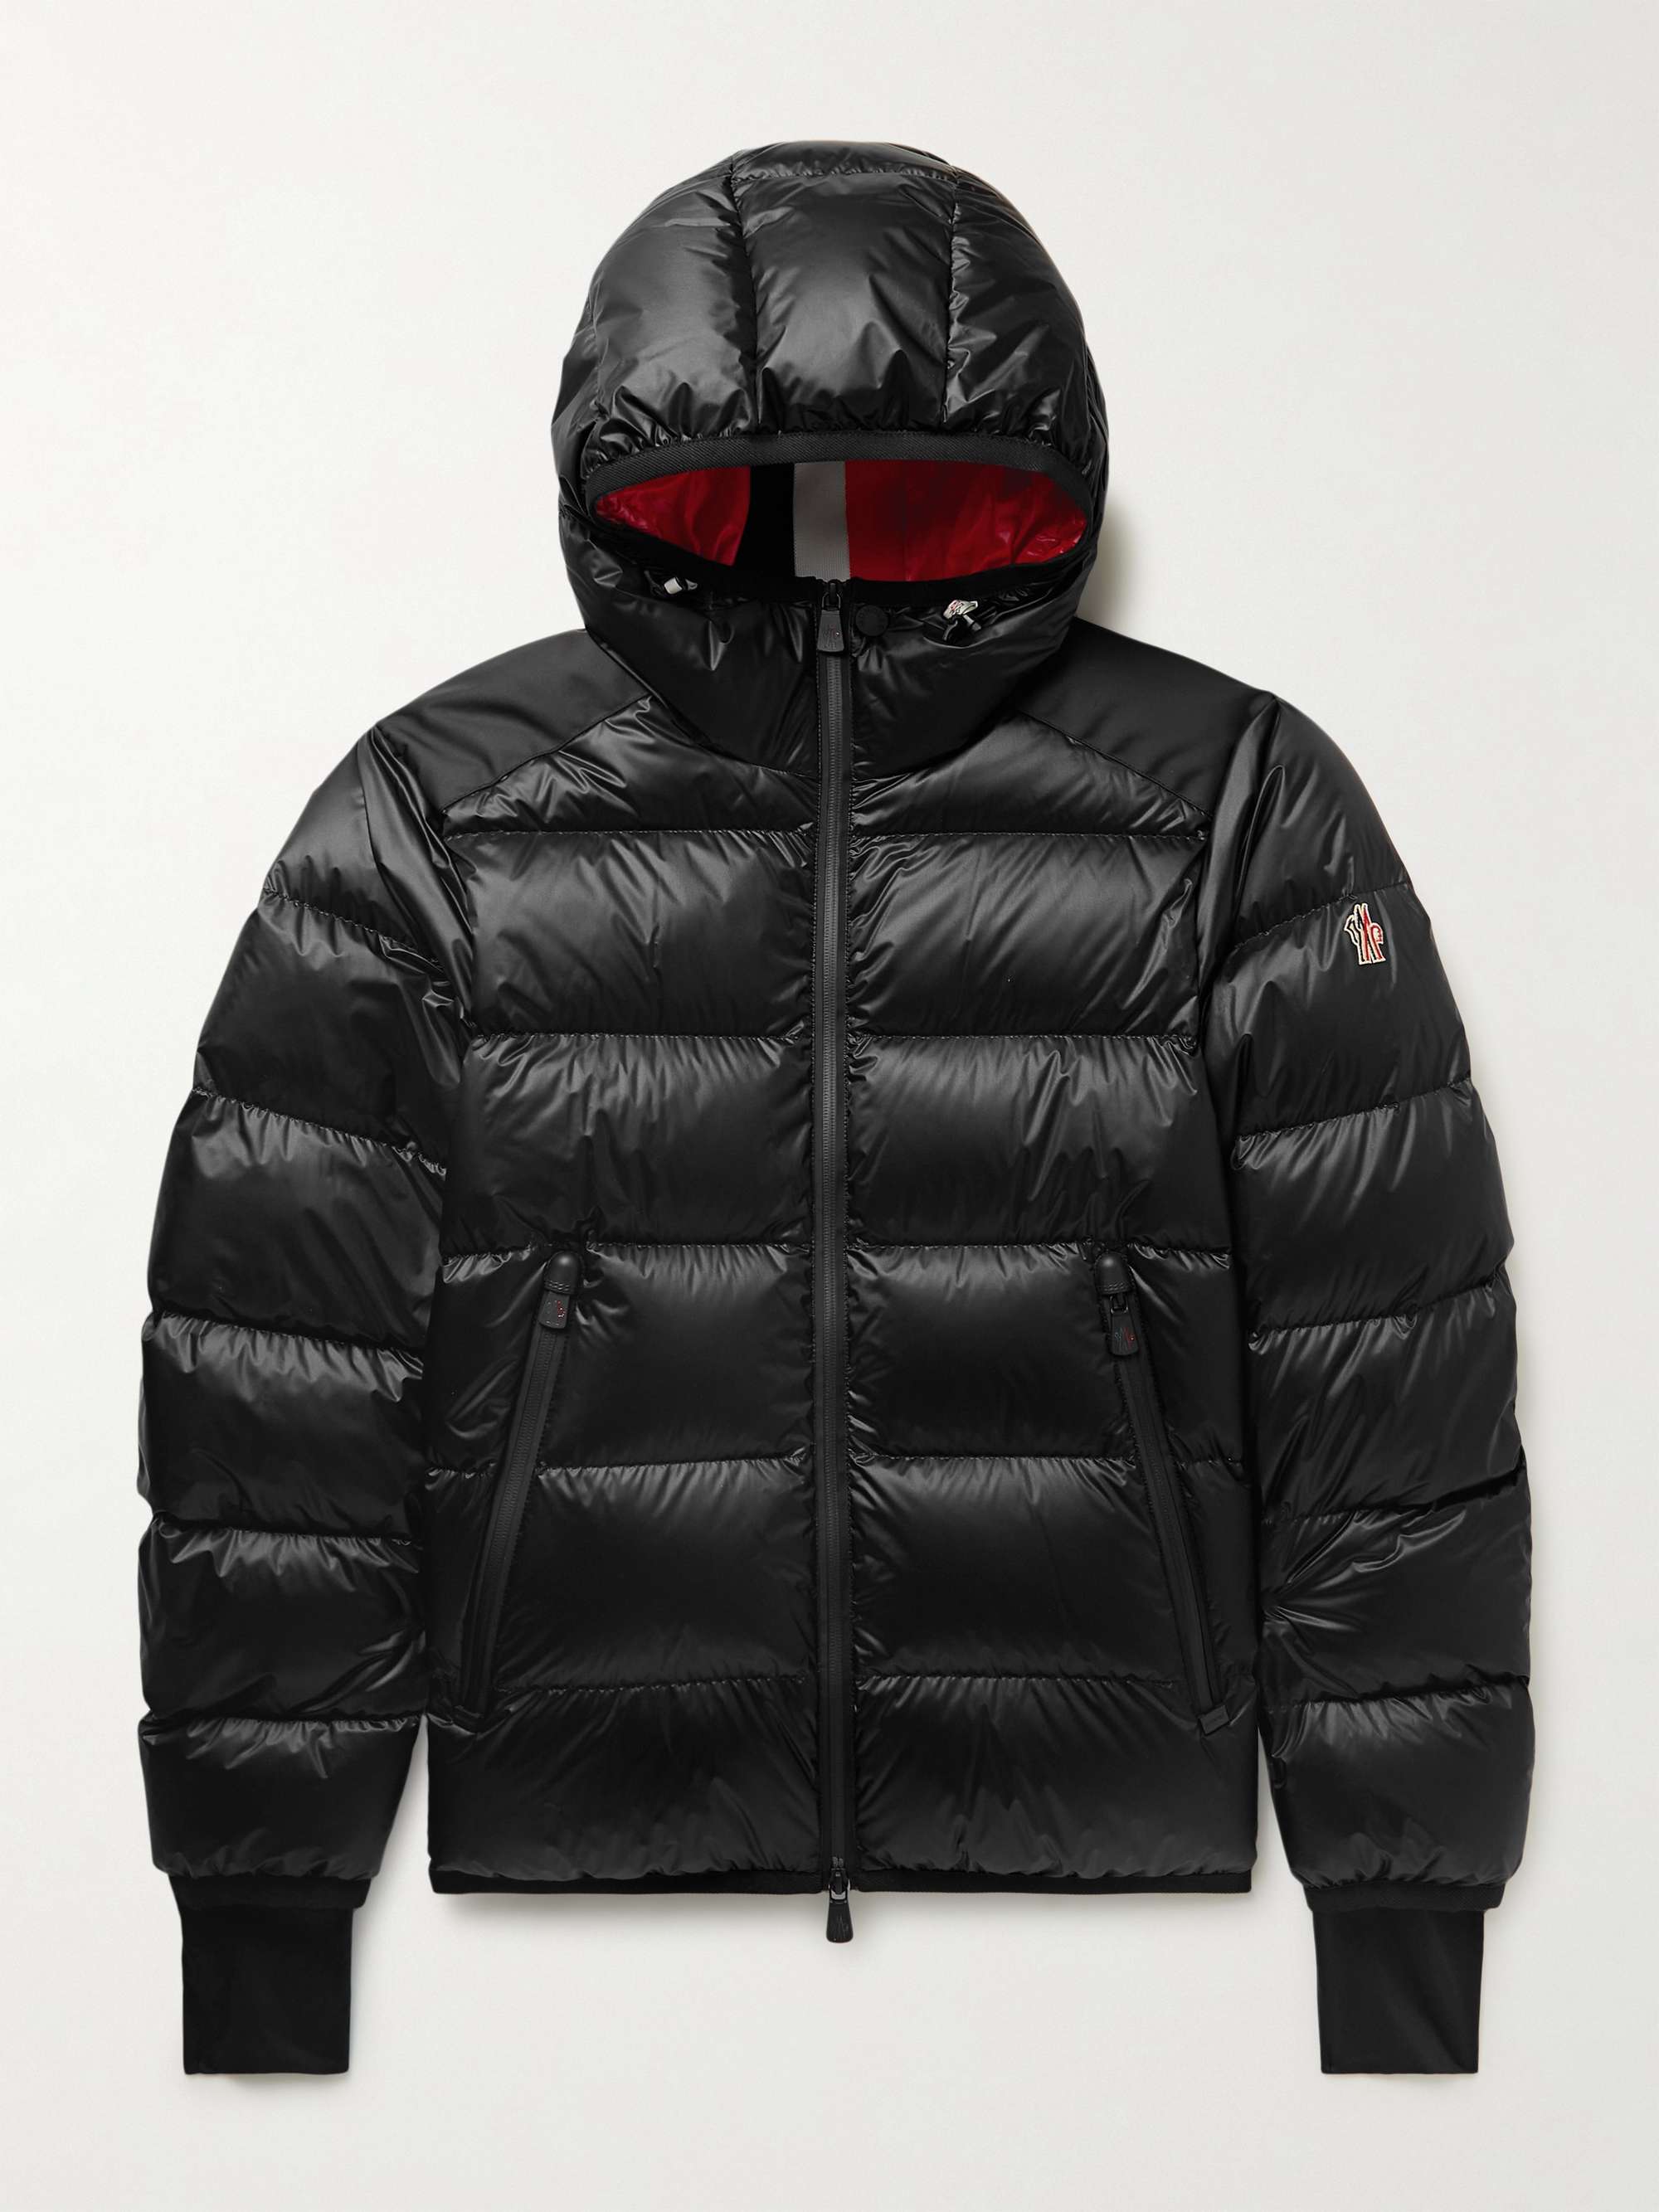 MONCLER GRENOBLE Hintertux Slim-Fit Quilted Hooded Down Ski Jacket